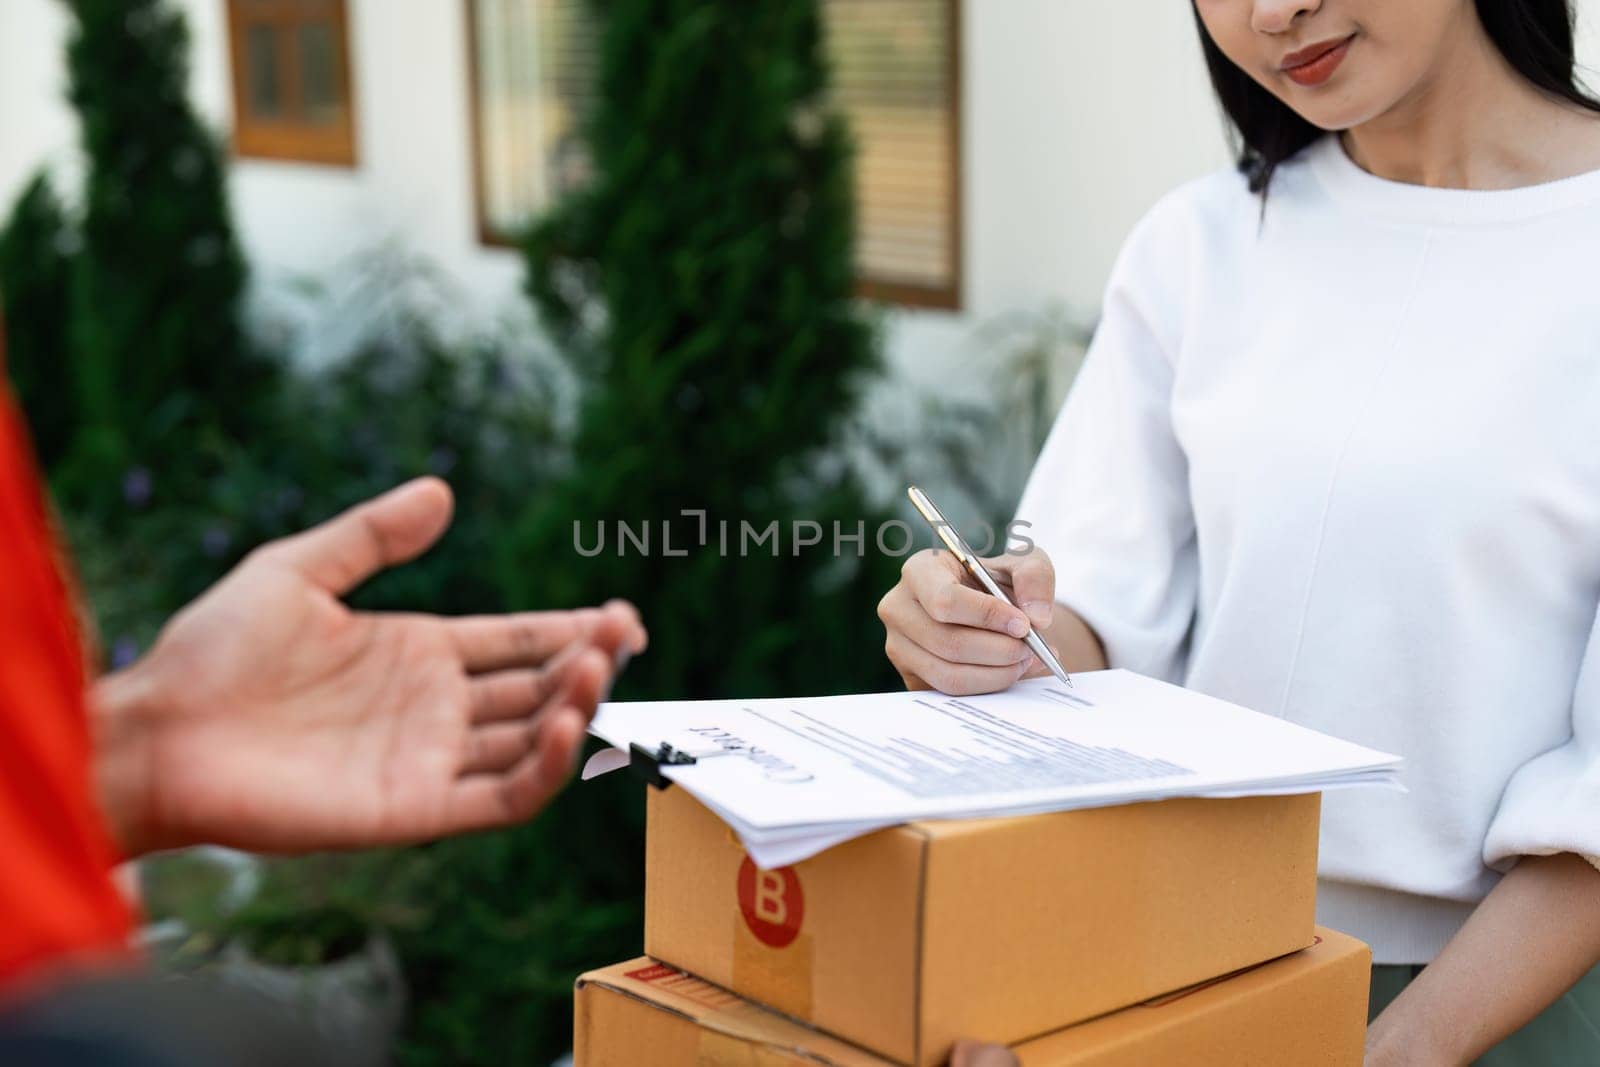 Young woman signature in document to receive package from professional delivery man at home.